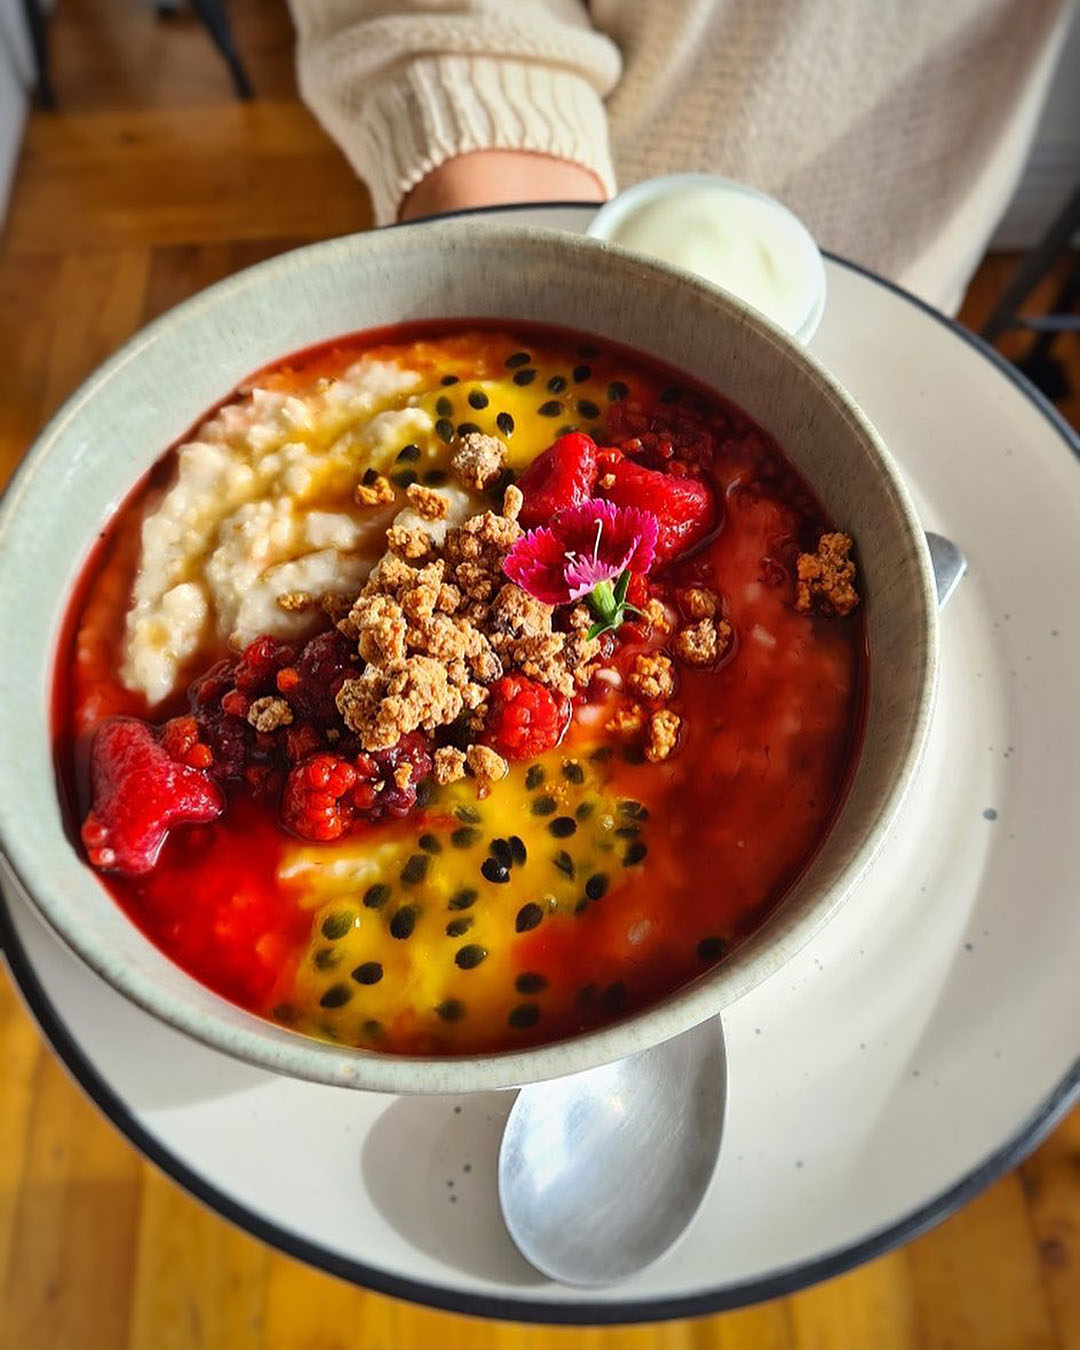 Colourful and delicious porridge with myriad ingredients at Bobby Franks Cafe, one of the best cafes in Nelson.